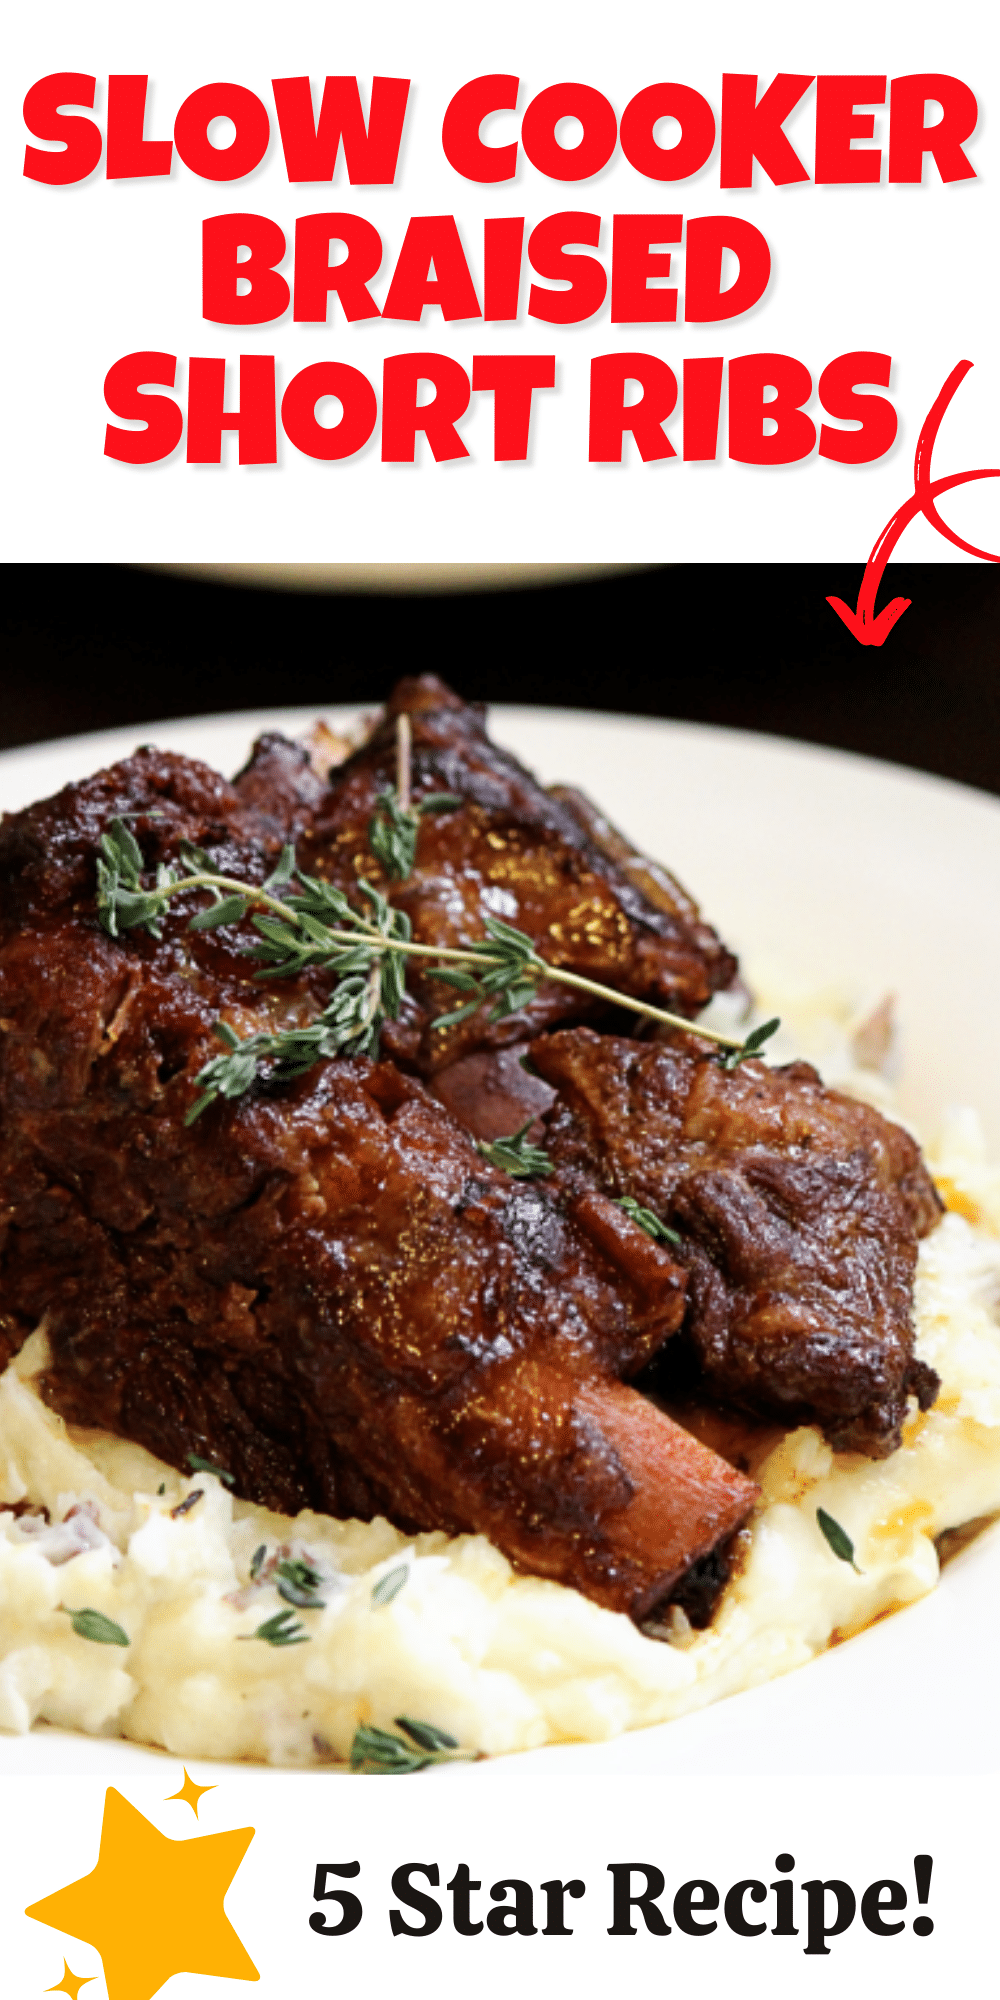 Slow Cooker Braised Short Ribs - Ready to make one of the most popular recipes on BigBearsWife.com. These Slow Cooker Braised Short Ribs are always a hit! This is the best beef short ribs recipe in my opinion. Perfect for a weekday dinner or for a fancy Sunday Dinner! This dinner recipe is super easy to make and it taste amazing!  via @bigbearswife